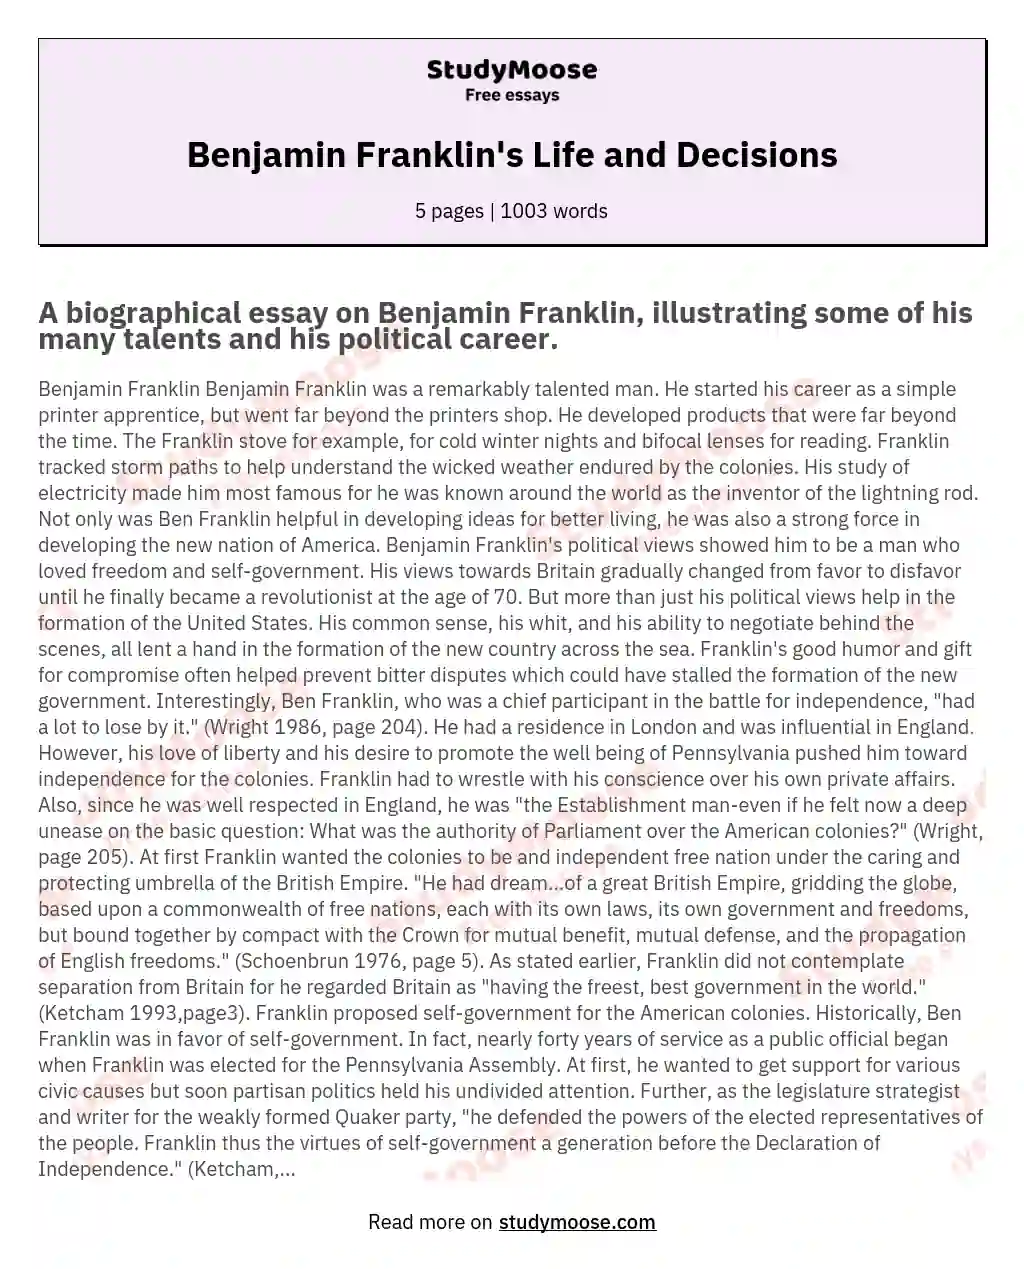 Benjamin Franklin's Life and Decisions